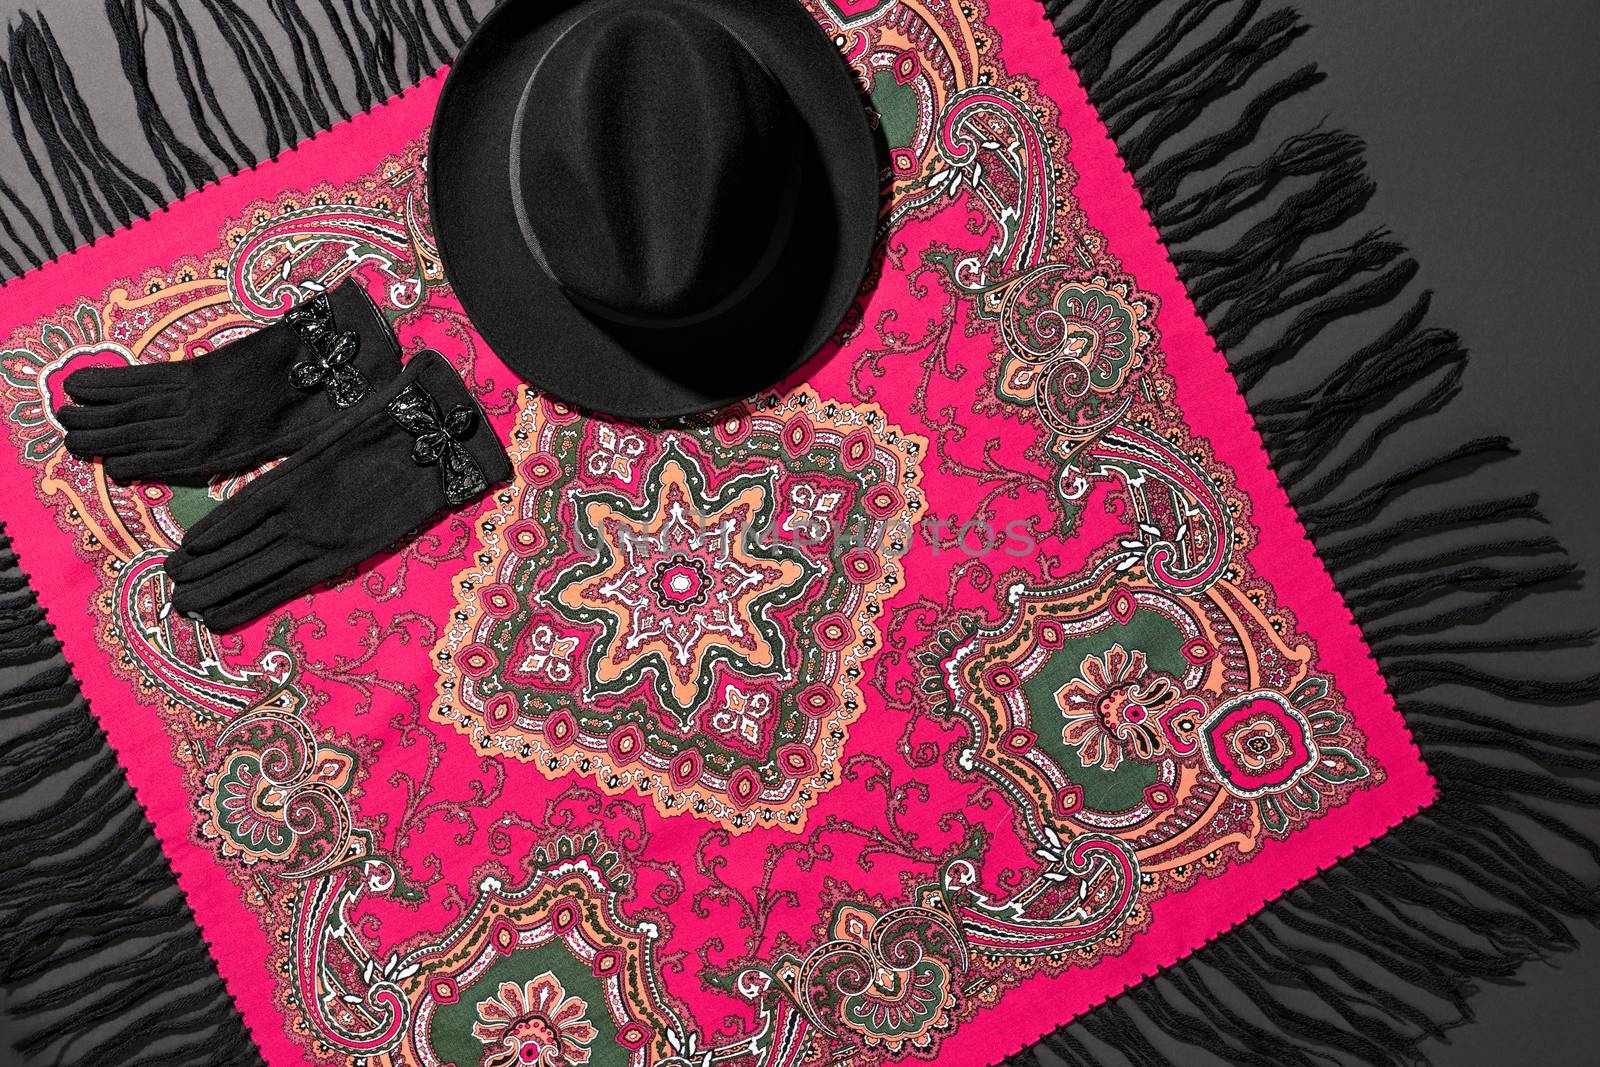 Fashion clothes stylish set, colored shawl and accessories. Ethnic traditional pattern pink cashmere, wool headscarf, trendy black hat, gloves. Unusual creative elegant. Autumn winter. Vintage retro